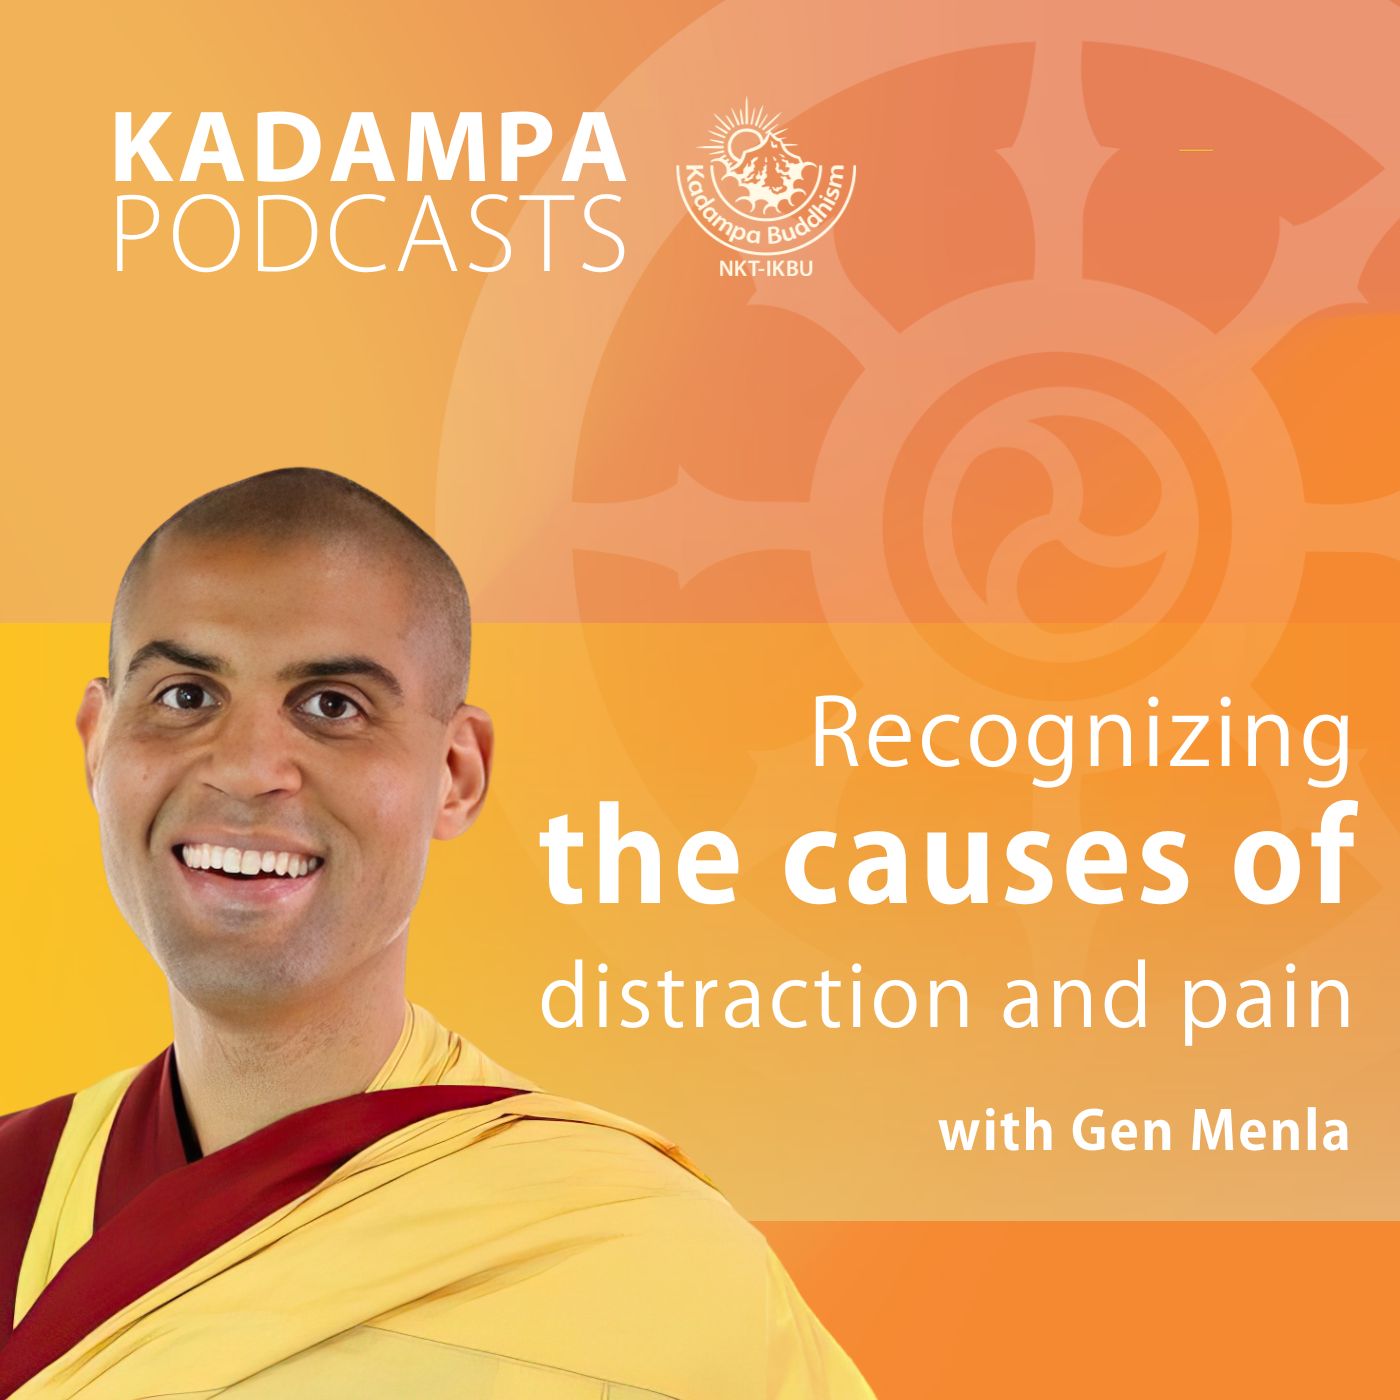 Recognising causes of distraction and pain